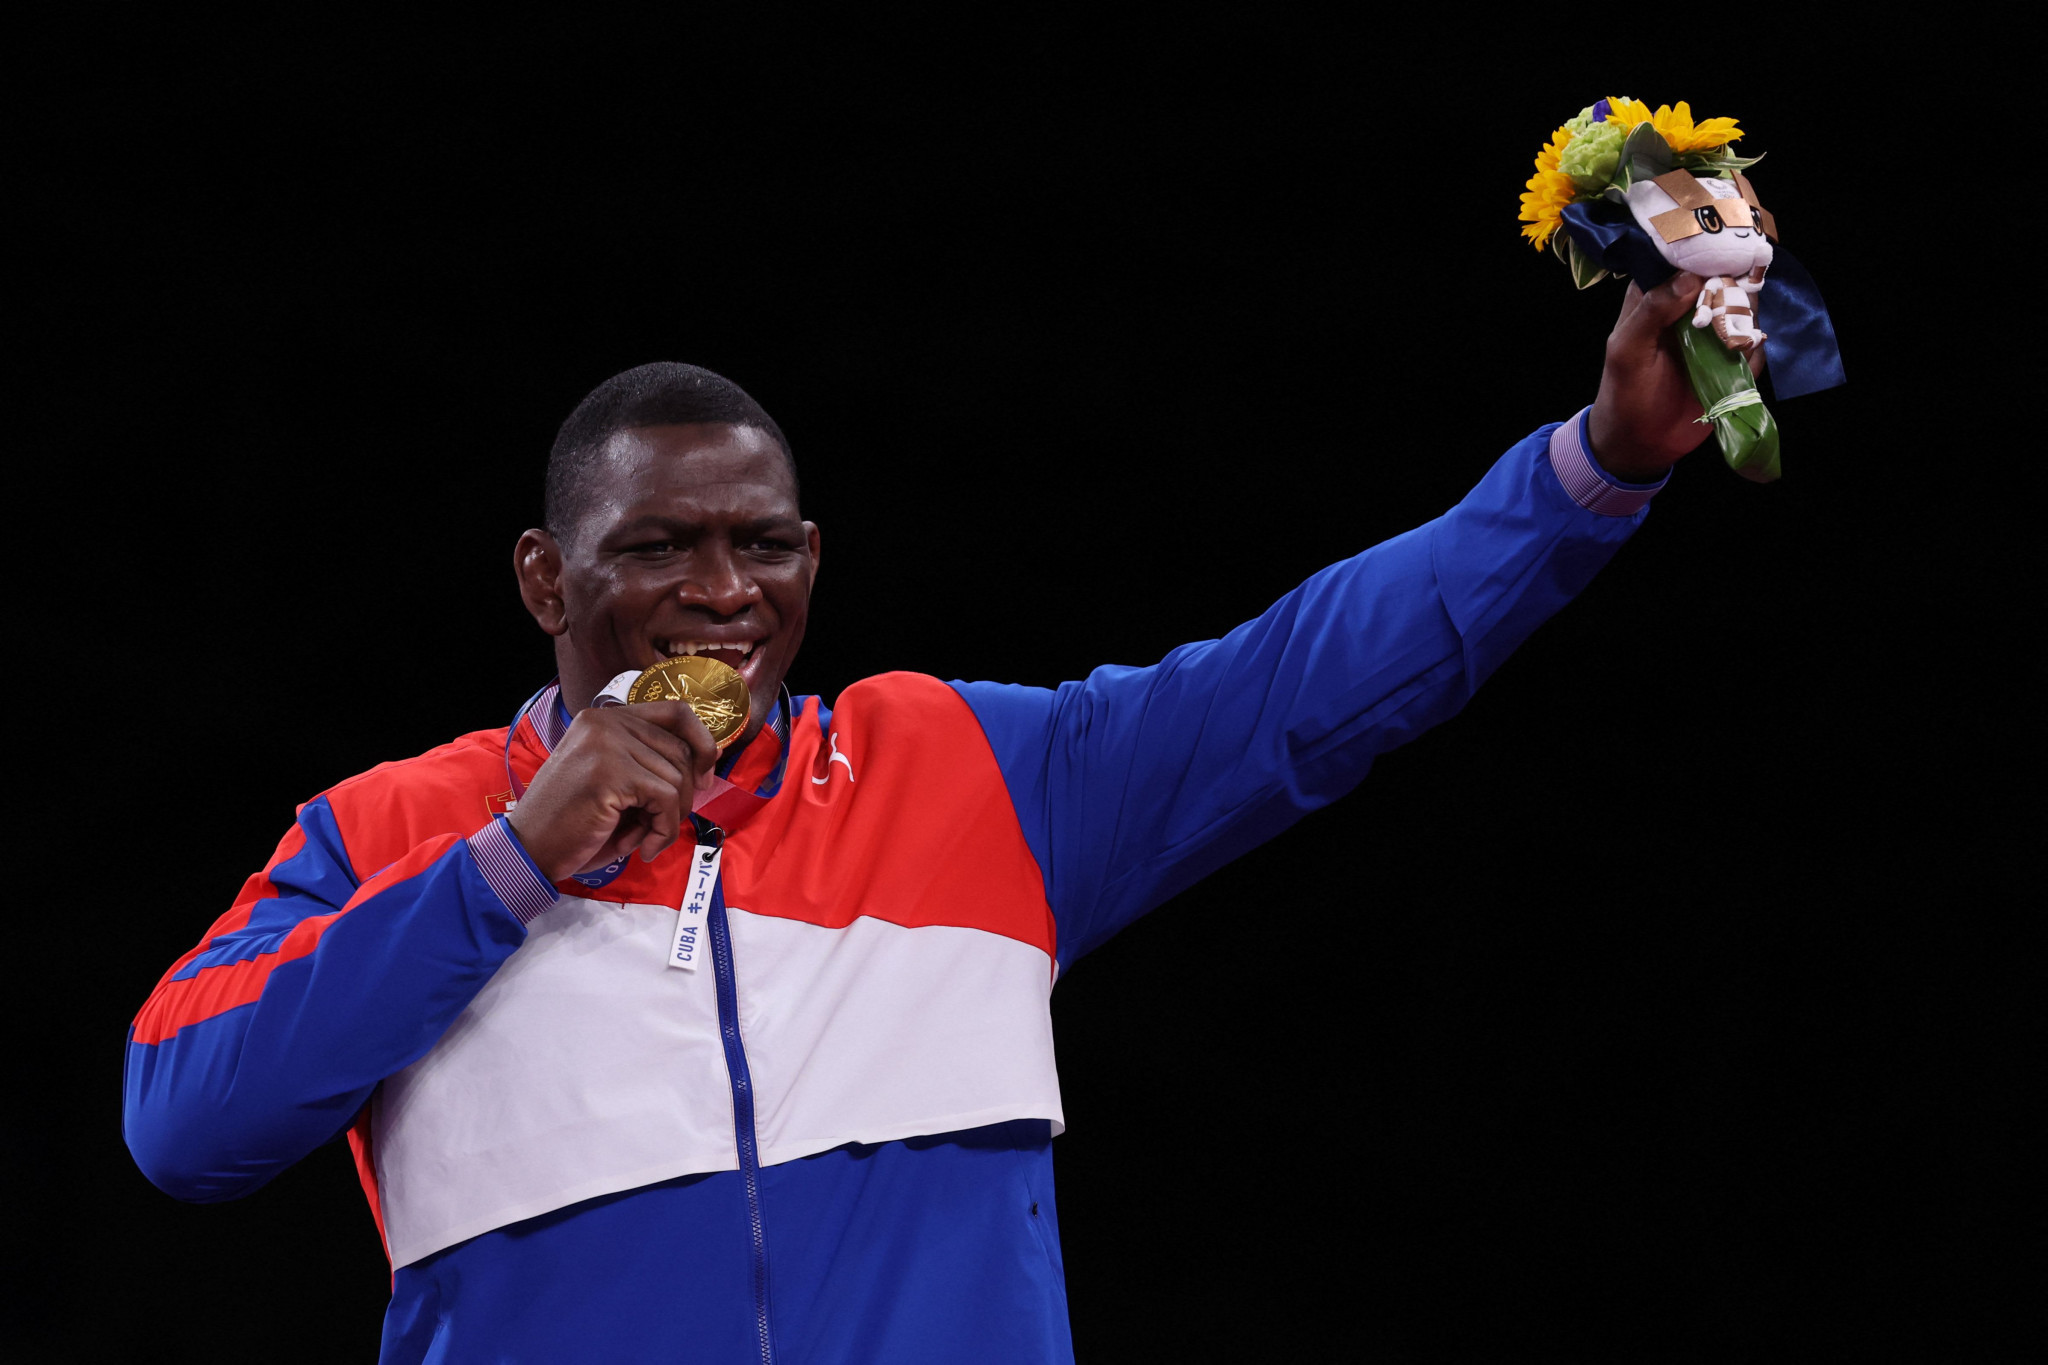 Cuba's four-time Olympic wrestling gold medallist Mijain Lopez is among the athletes selected for Team Panam Sports ©Getty Images